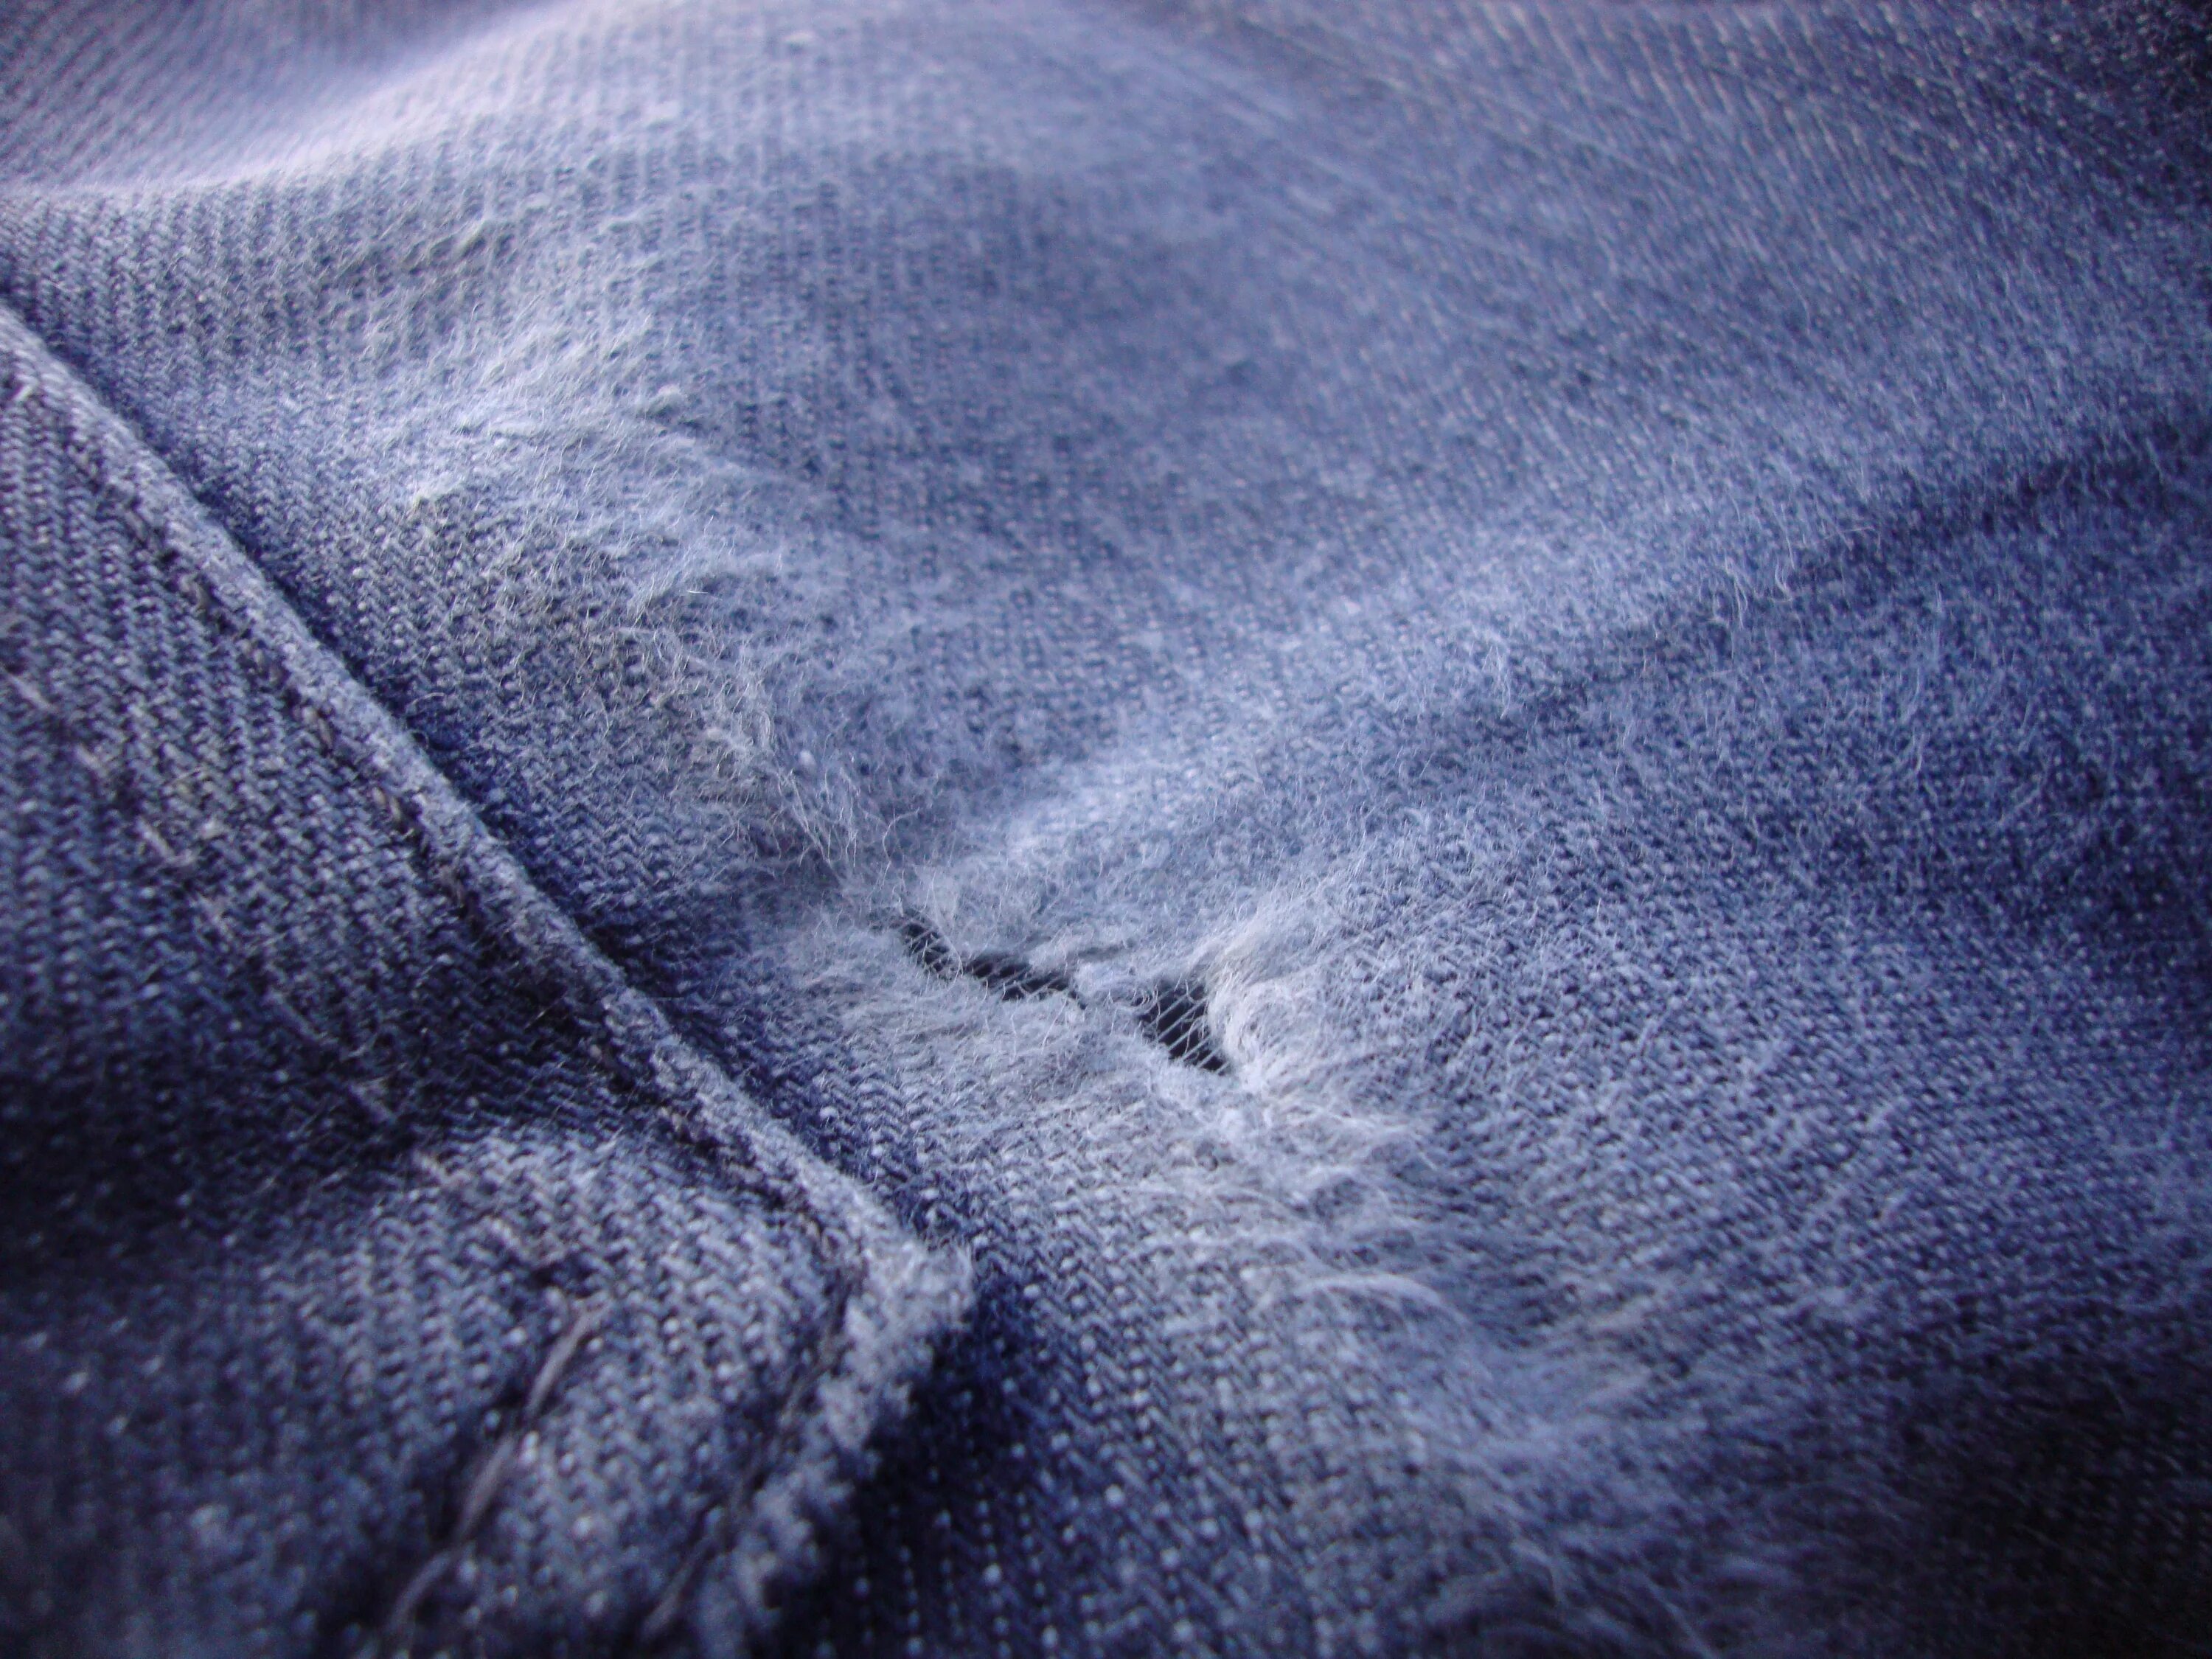 Worn clothes. Torn clothes texture. Real Wear and tear.